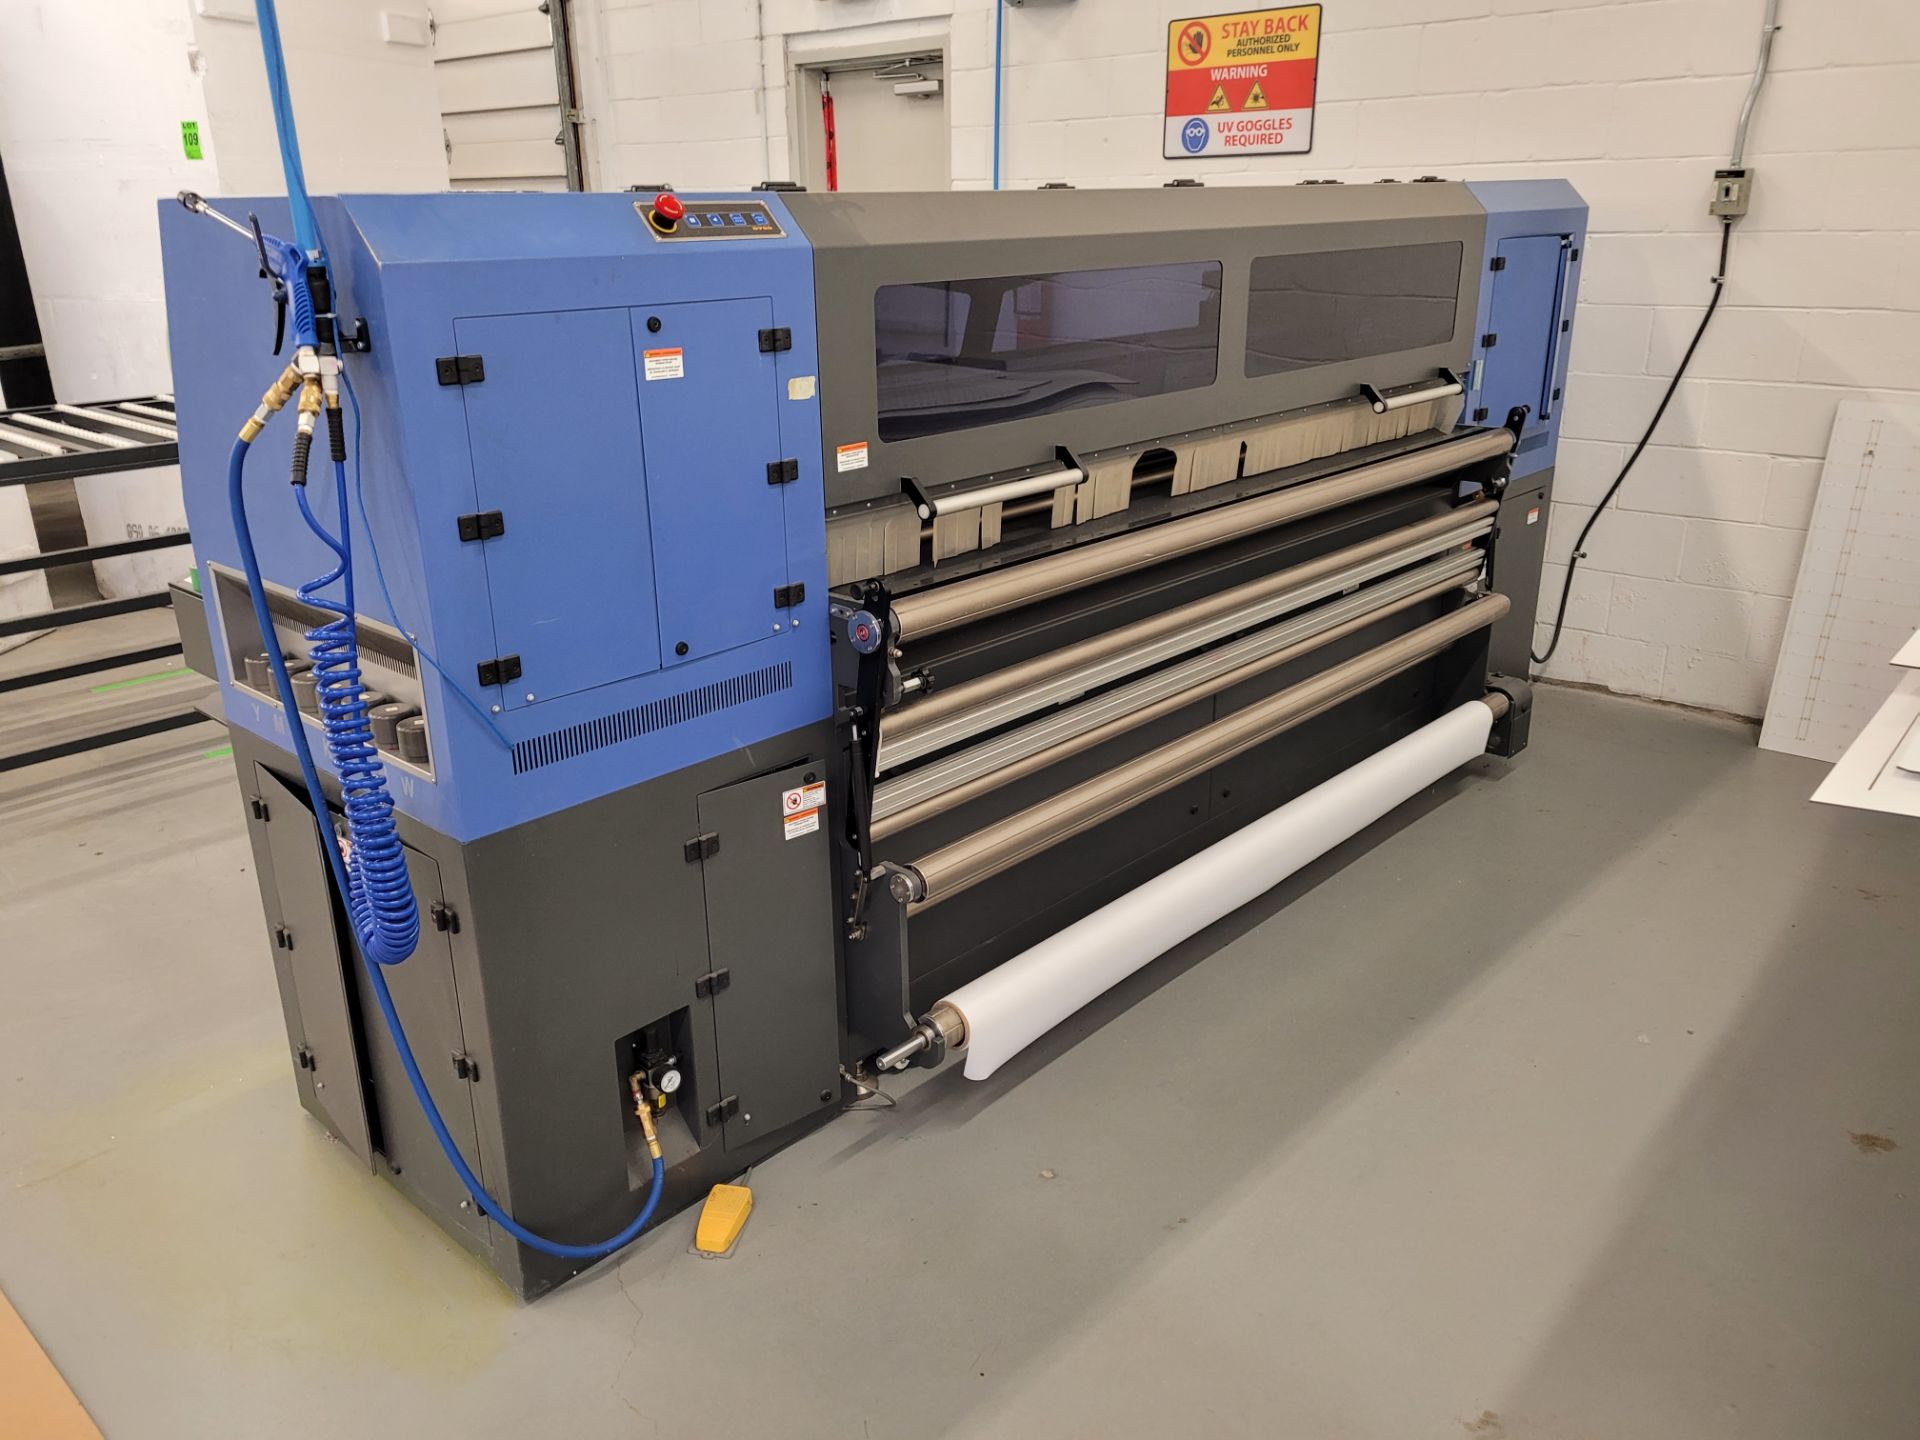 DYSS UV Printing Machine mod. Lasco & Apollo, ser. 221674RR000100264, 220V, includes conveyors and - Image 6 of 37